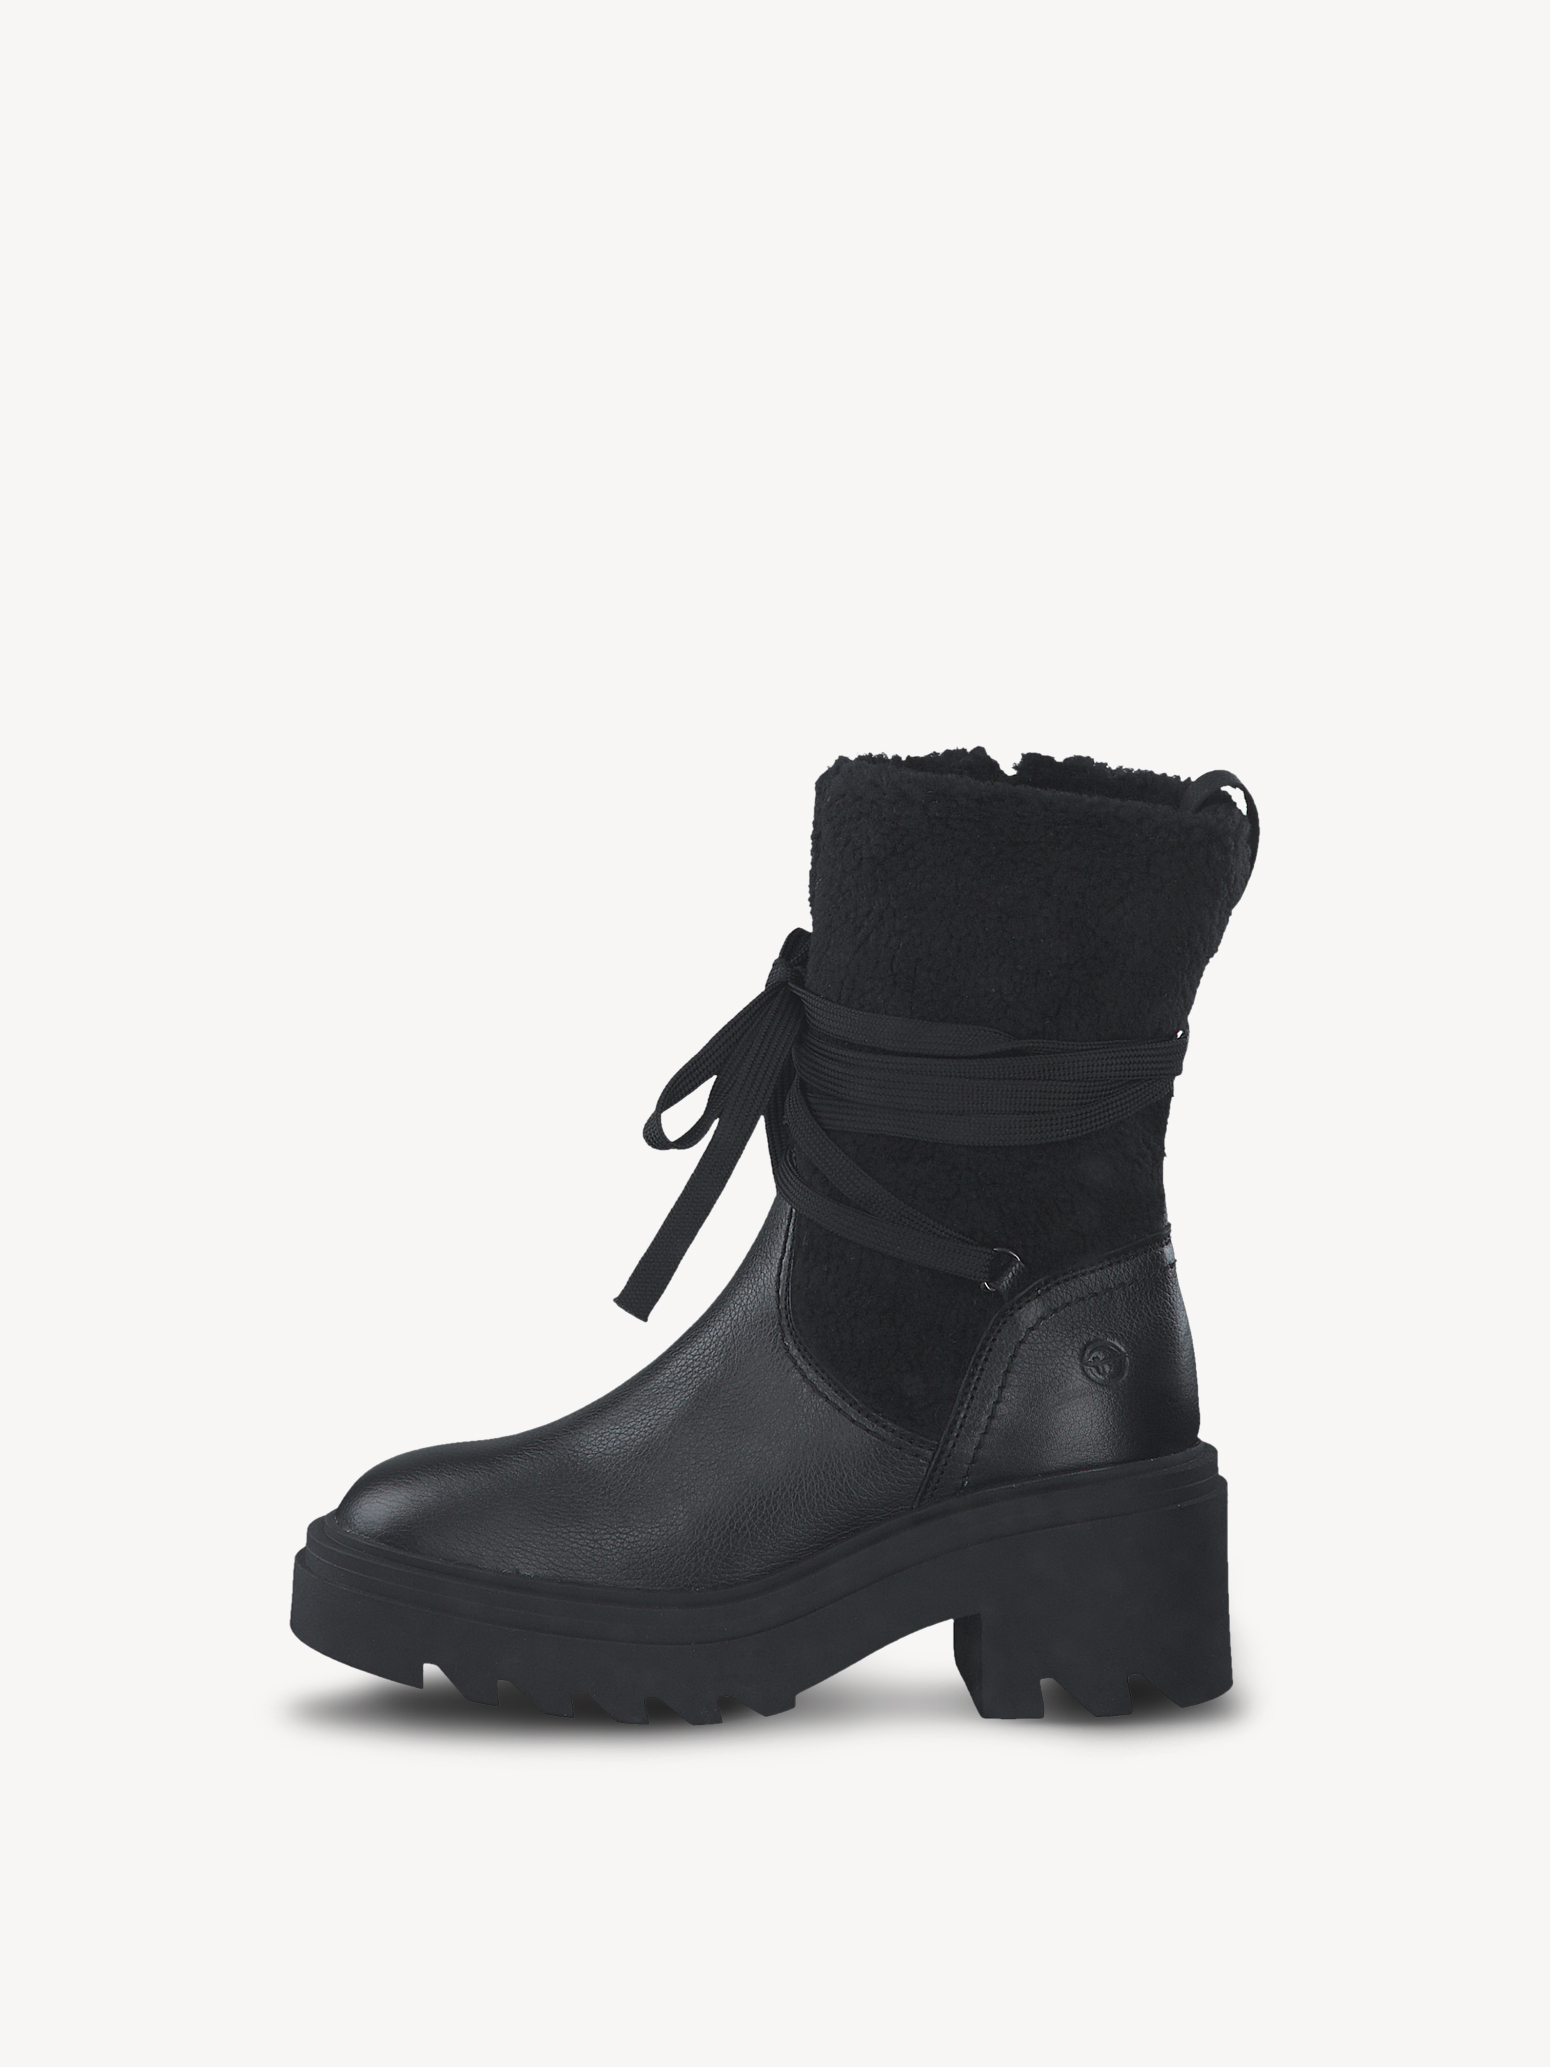 Leather Bootie - black warm lining